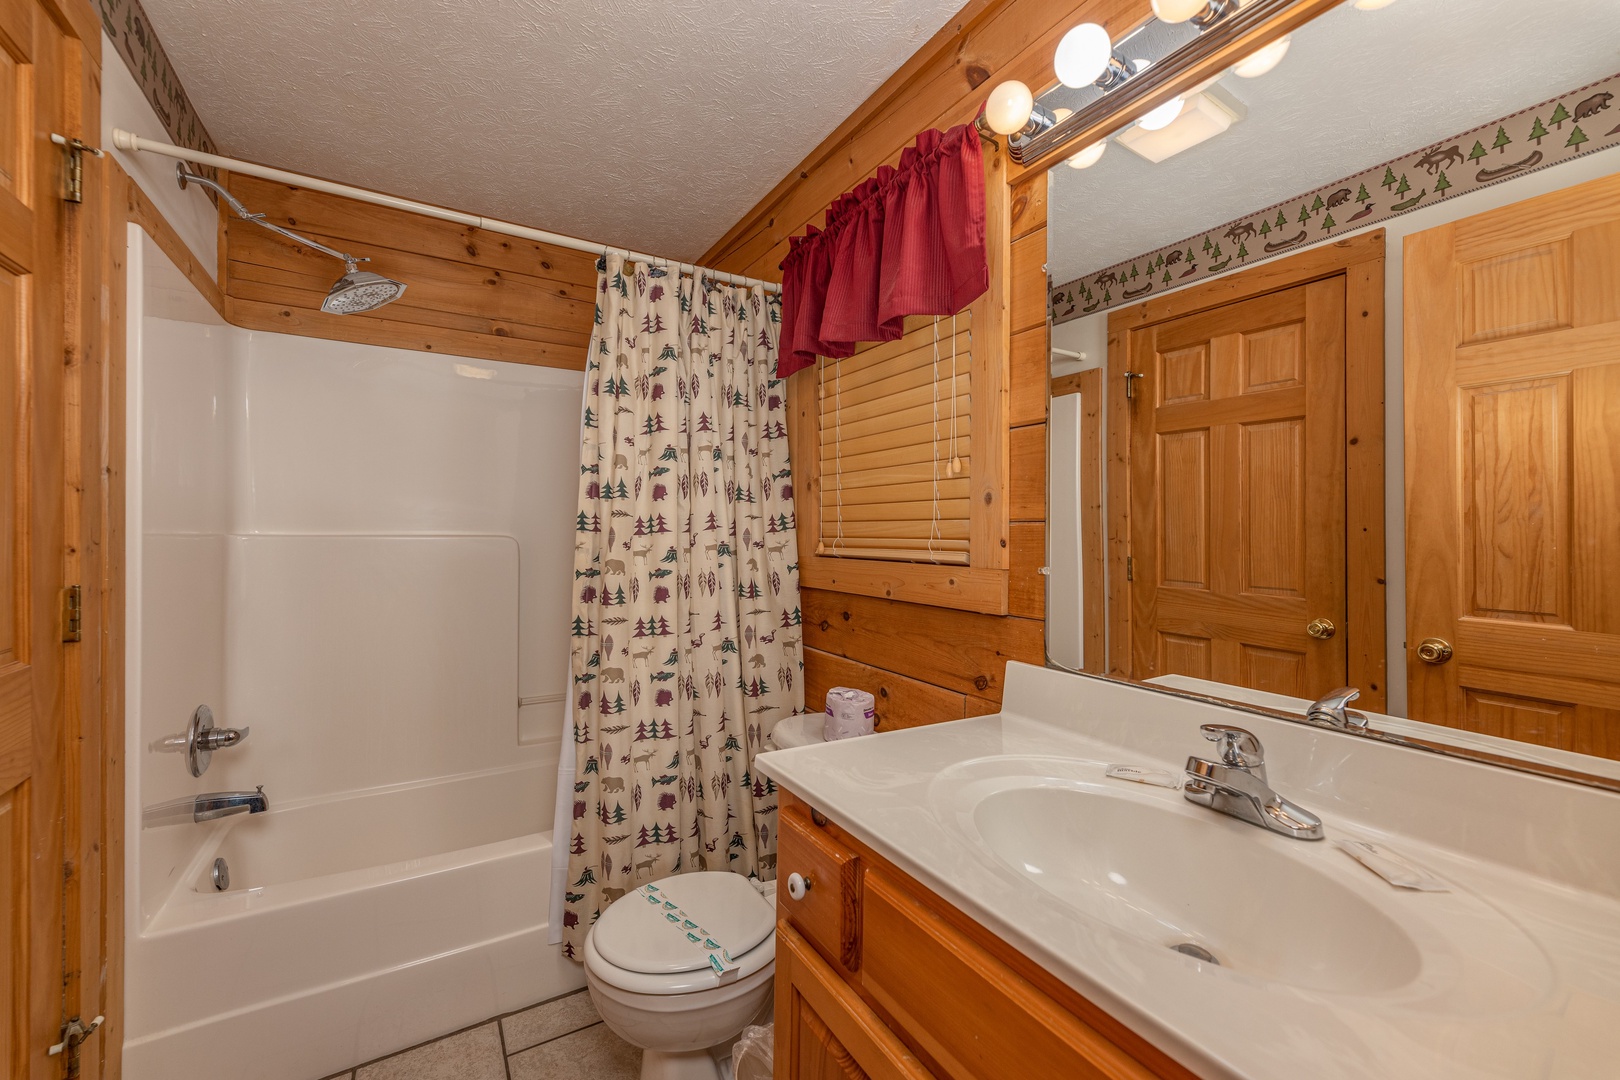 Bathroom with tub and shower at Cub's Crossing, a 3 bedroom cabin rental located in Gatlinburg